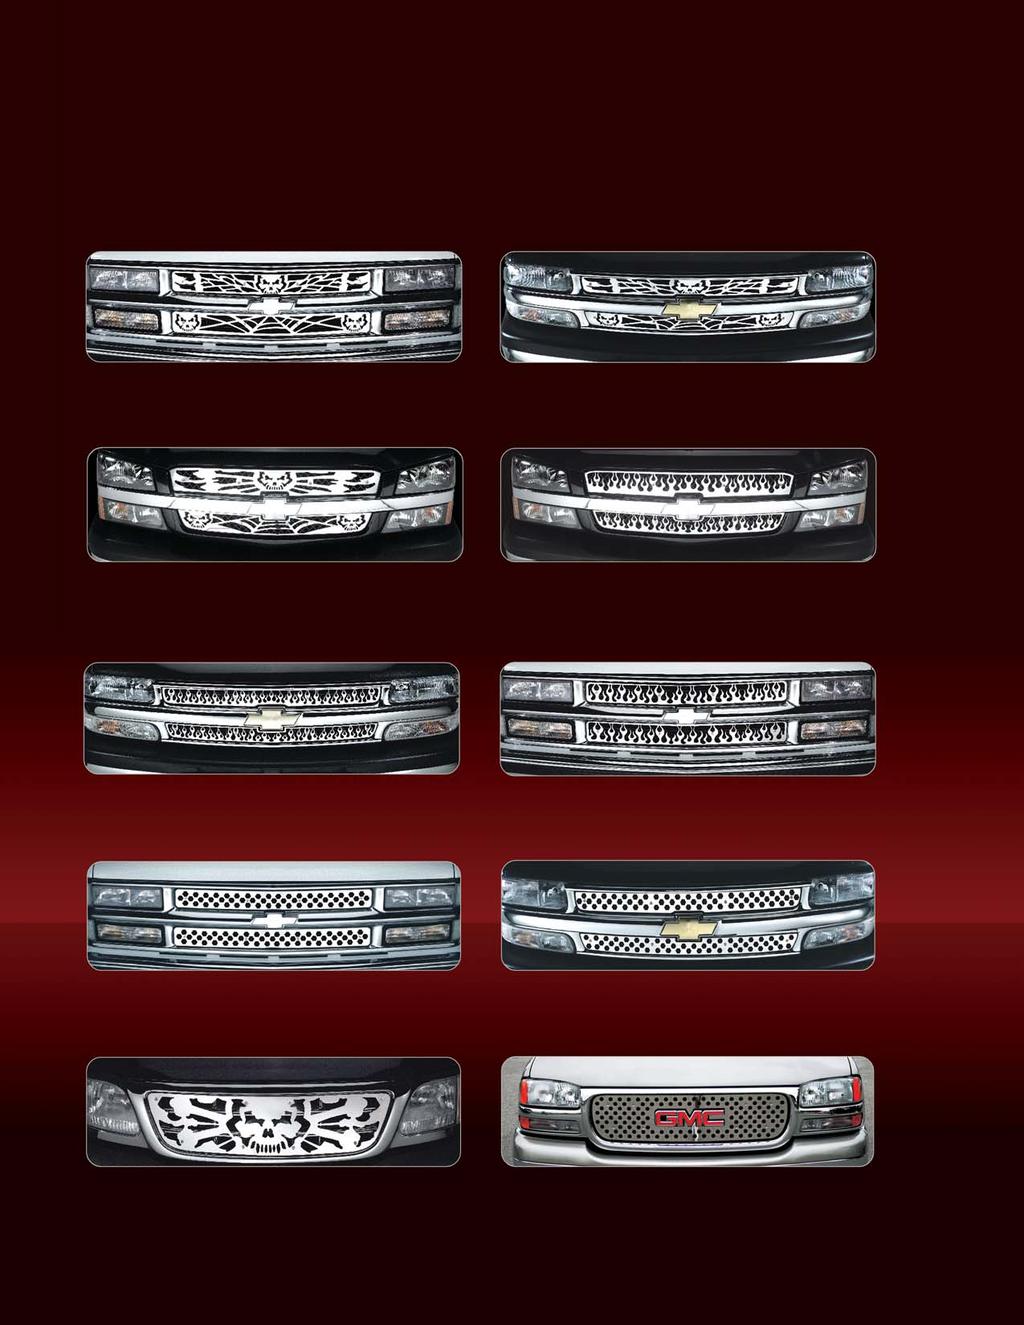 STAINLESS STEEL GRILLE INSERTS SG-131 94-98 Chevy C/K Full Size Truck 1500 / 500 / 3500 94-99 Chevy Suburban / Tahoe SG-13 99-0 Chevy Silverado 1500 / 500LD 00-06 Chevy Suburban / Tahoe SG-133 03-05